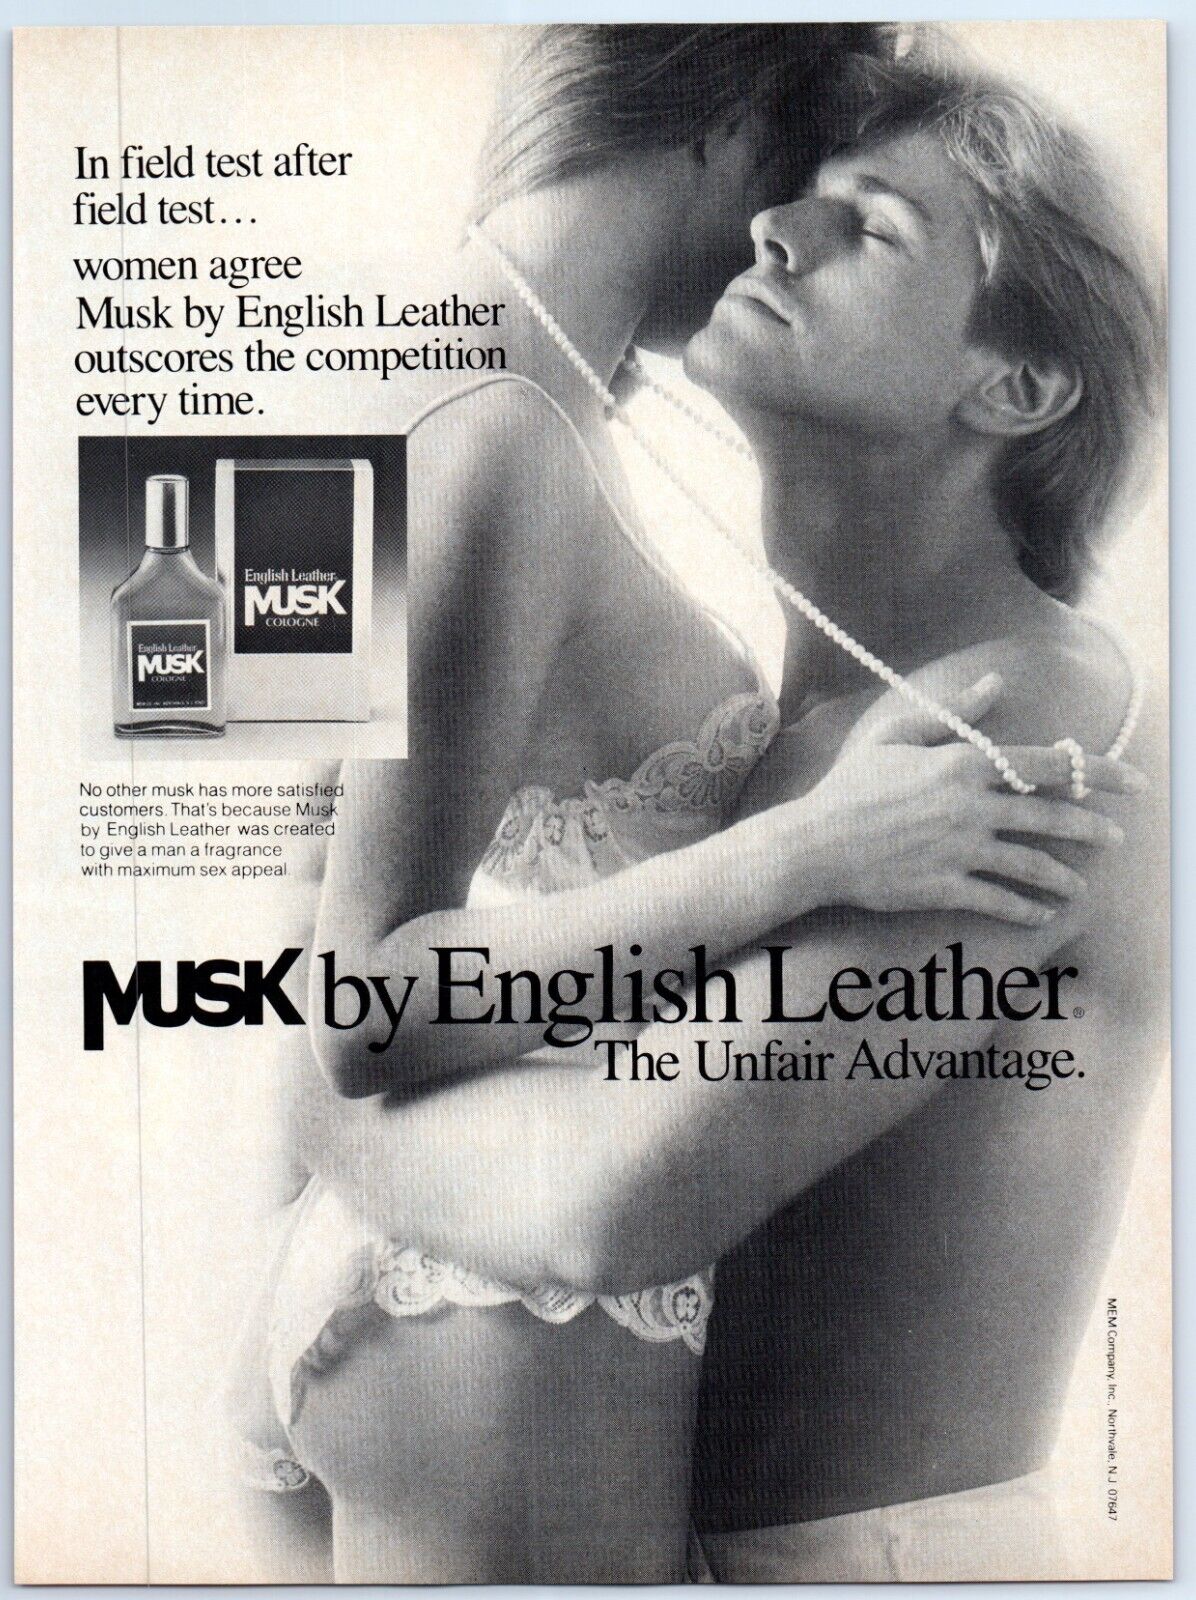 Musk by English Leather Cologne Sexy Woman in Lingerie 1988 Print Ad 8\